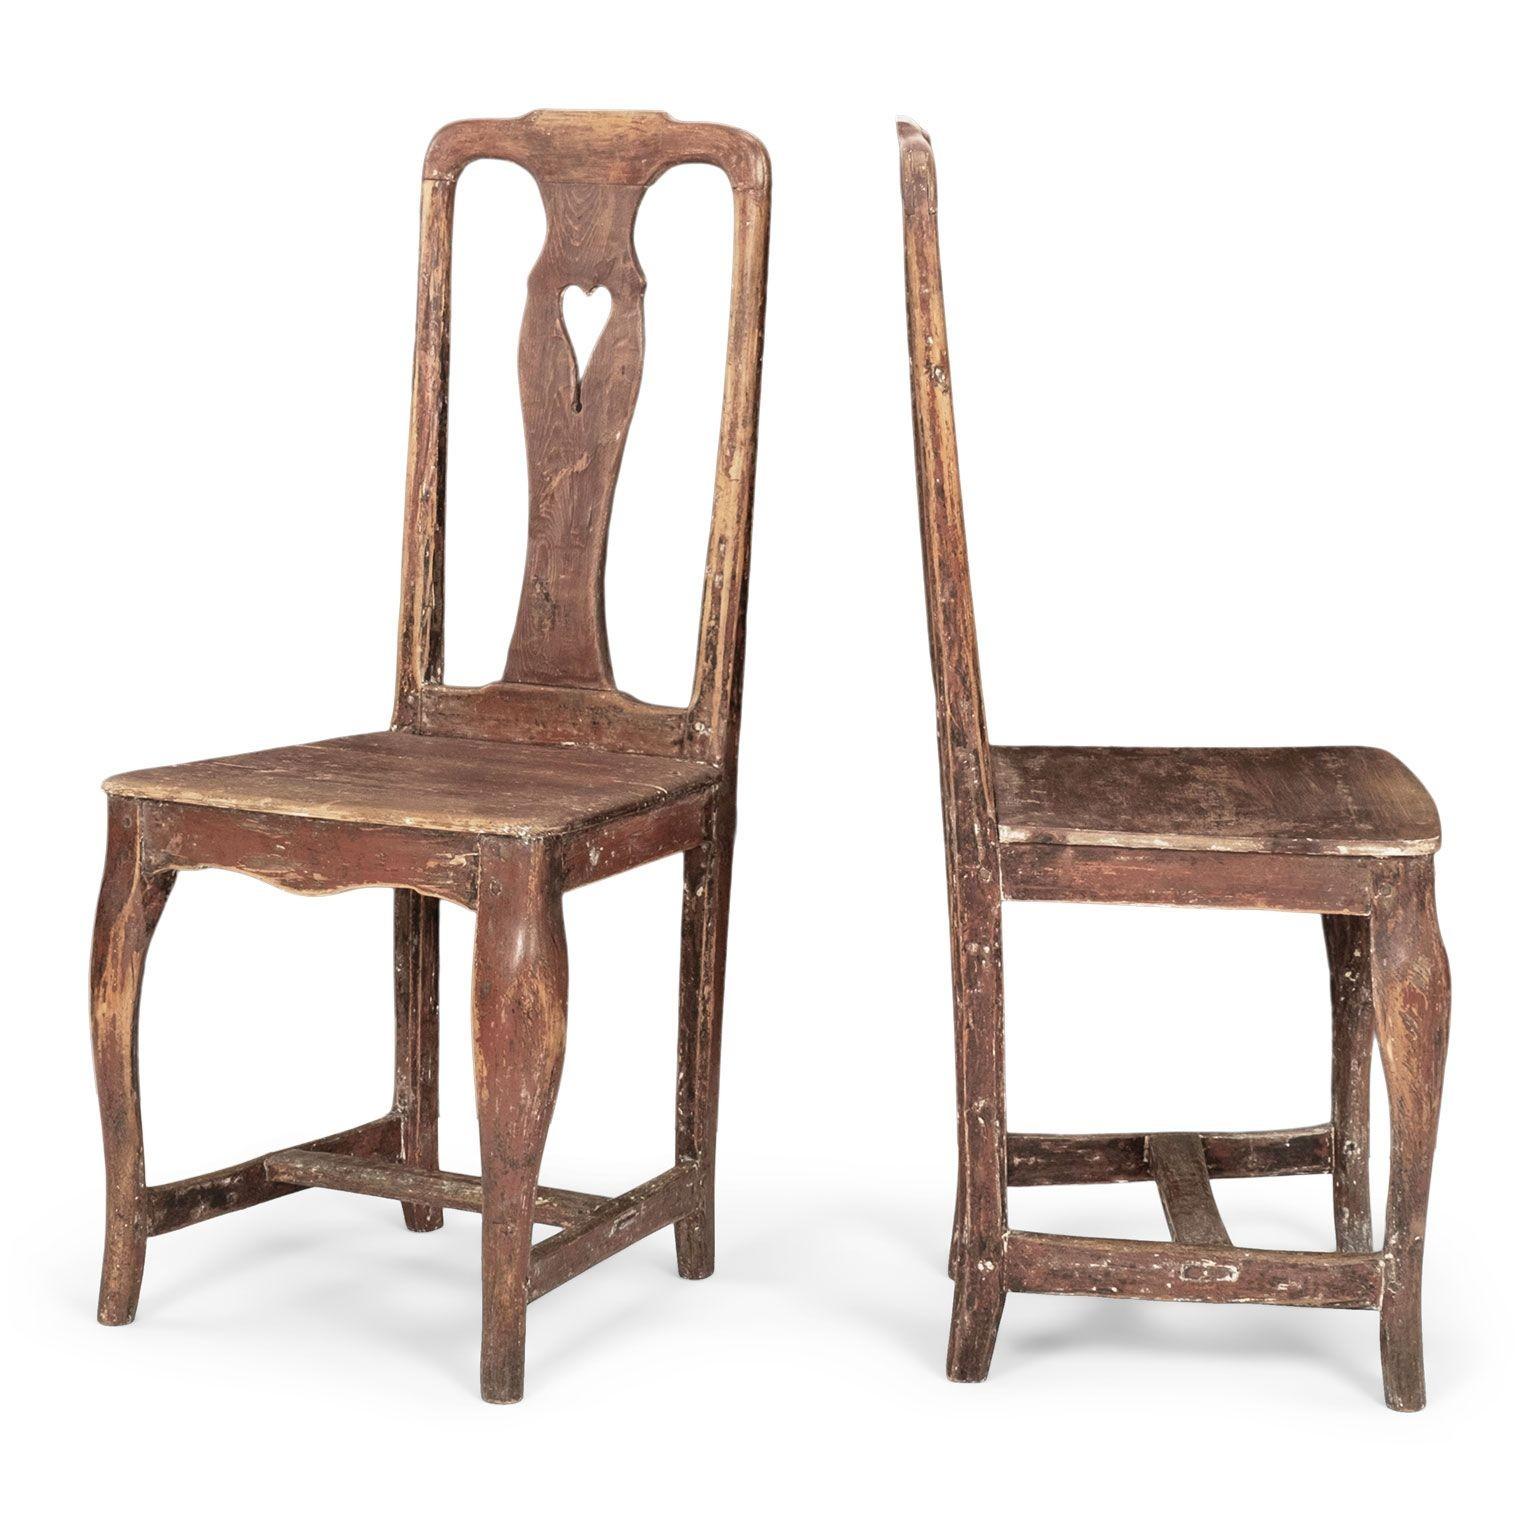 Pair of Swedish rococo period chairs, hand-carved circa 1750-1789. Finish gently scraped back to original and early layers of paint in shades of red. Sold together and priced $2,900 for the pair.

Note: Abrupt transitions in climate and humidity